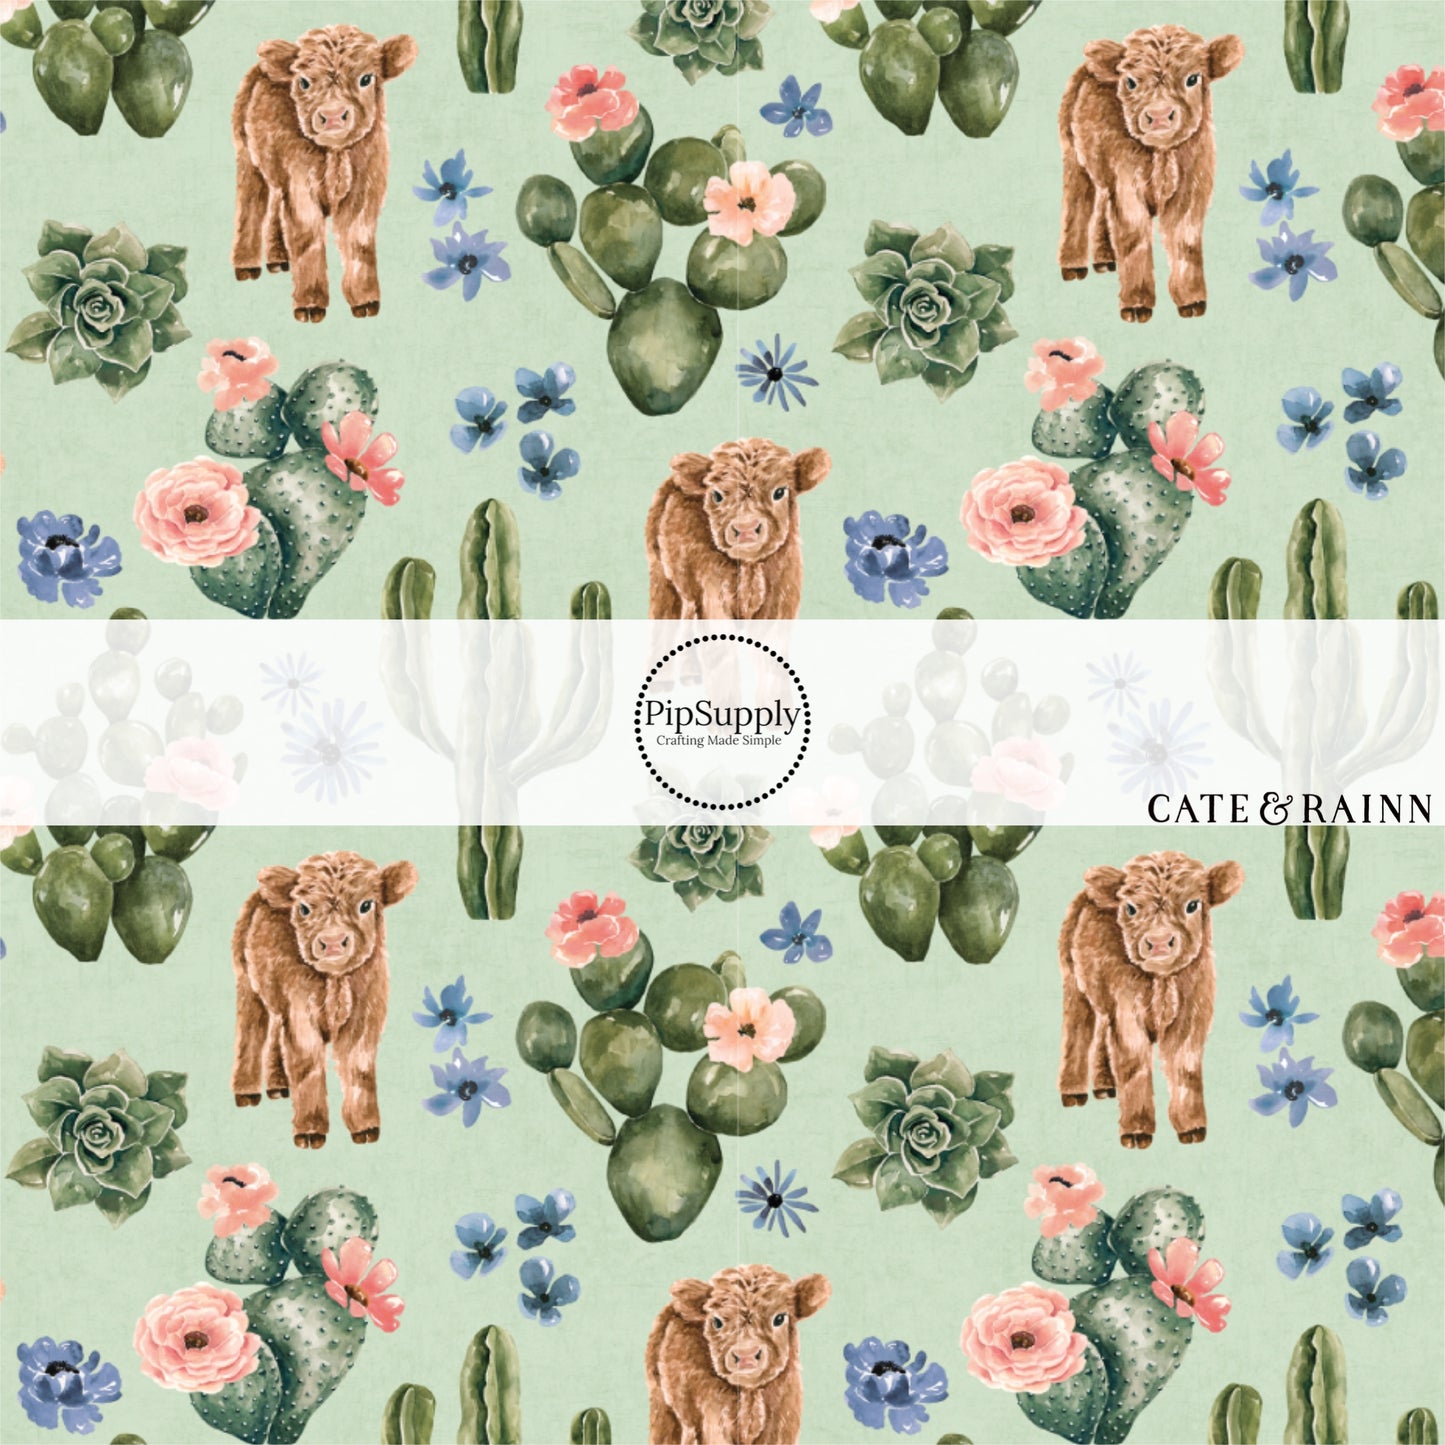 These cows, cacti, and flower pattern themed no sew bow strips can be easily tied and attached to a clip for a finished hair bow. These bow strips are great for personal use or to sell. The bow strips features brown cows surrounded by pink and blue flower bunches and cacti on aqua blue.